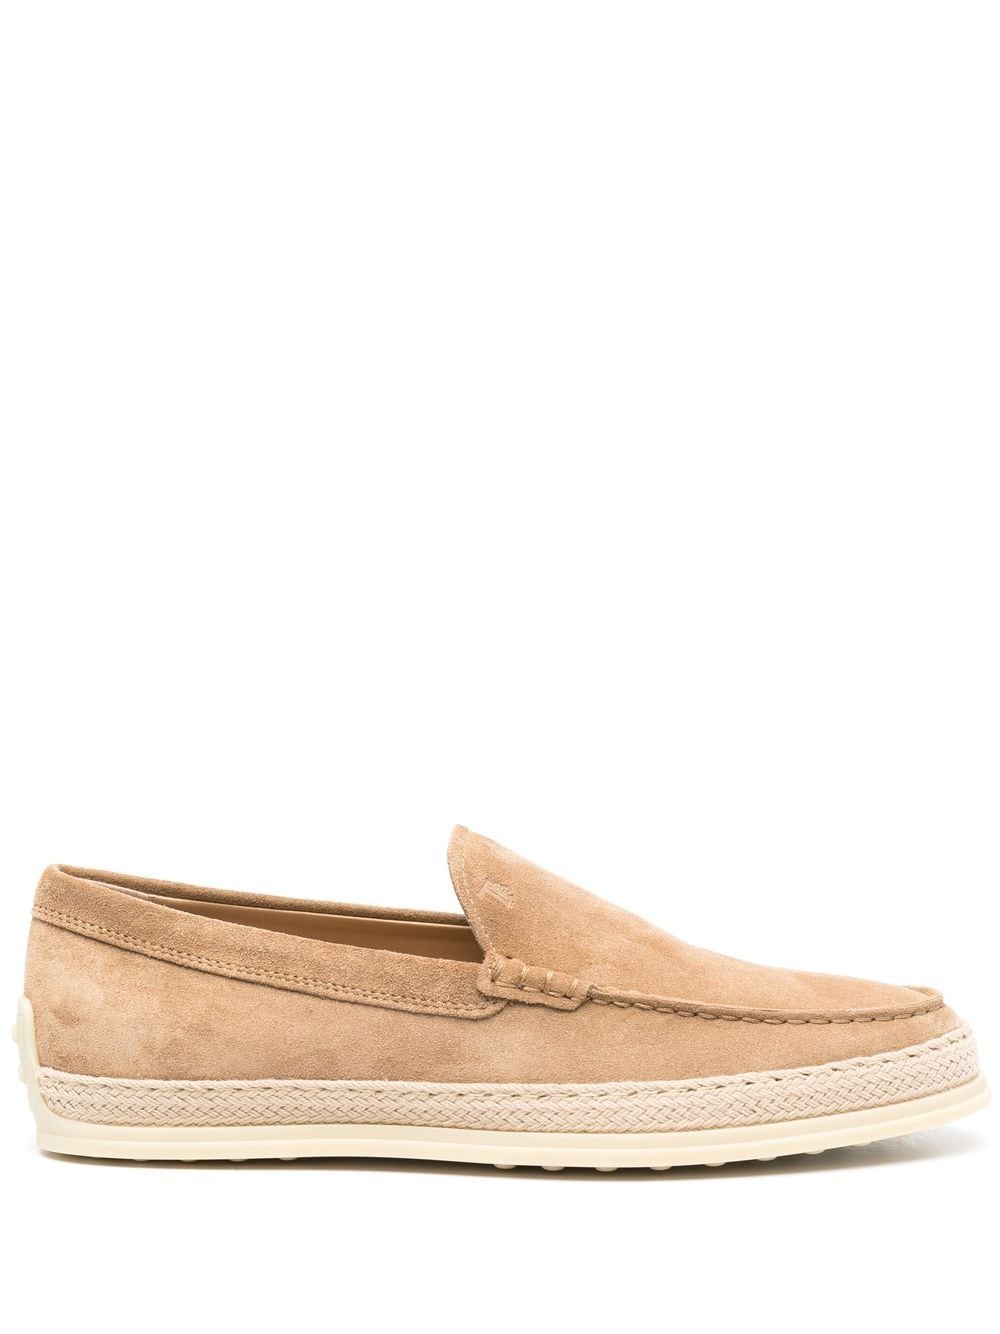 Suede espadrille loafers